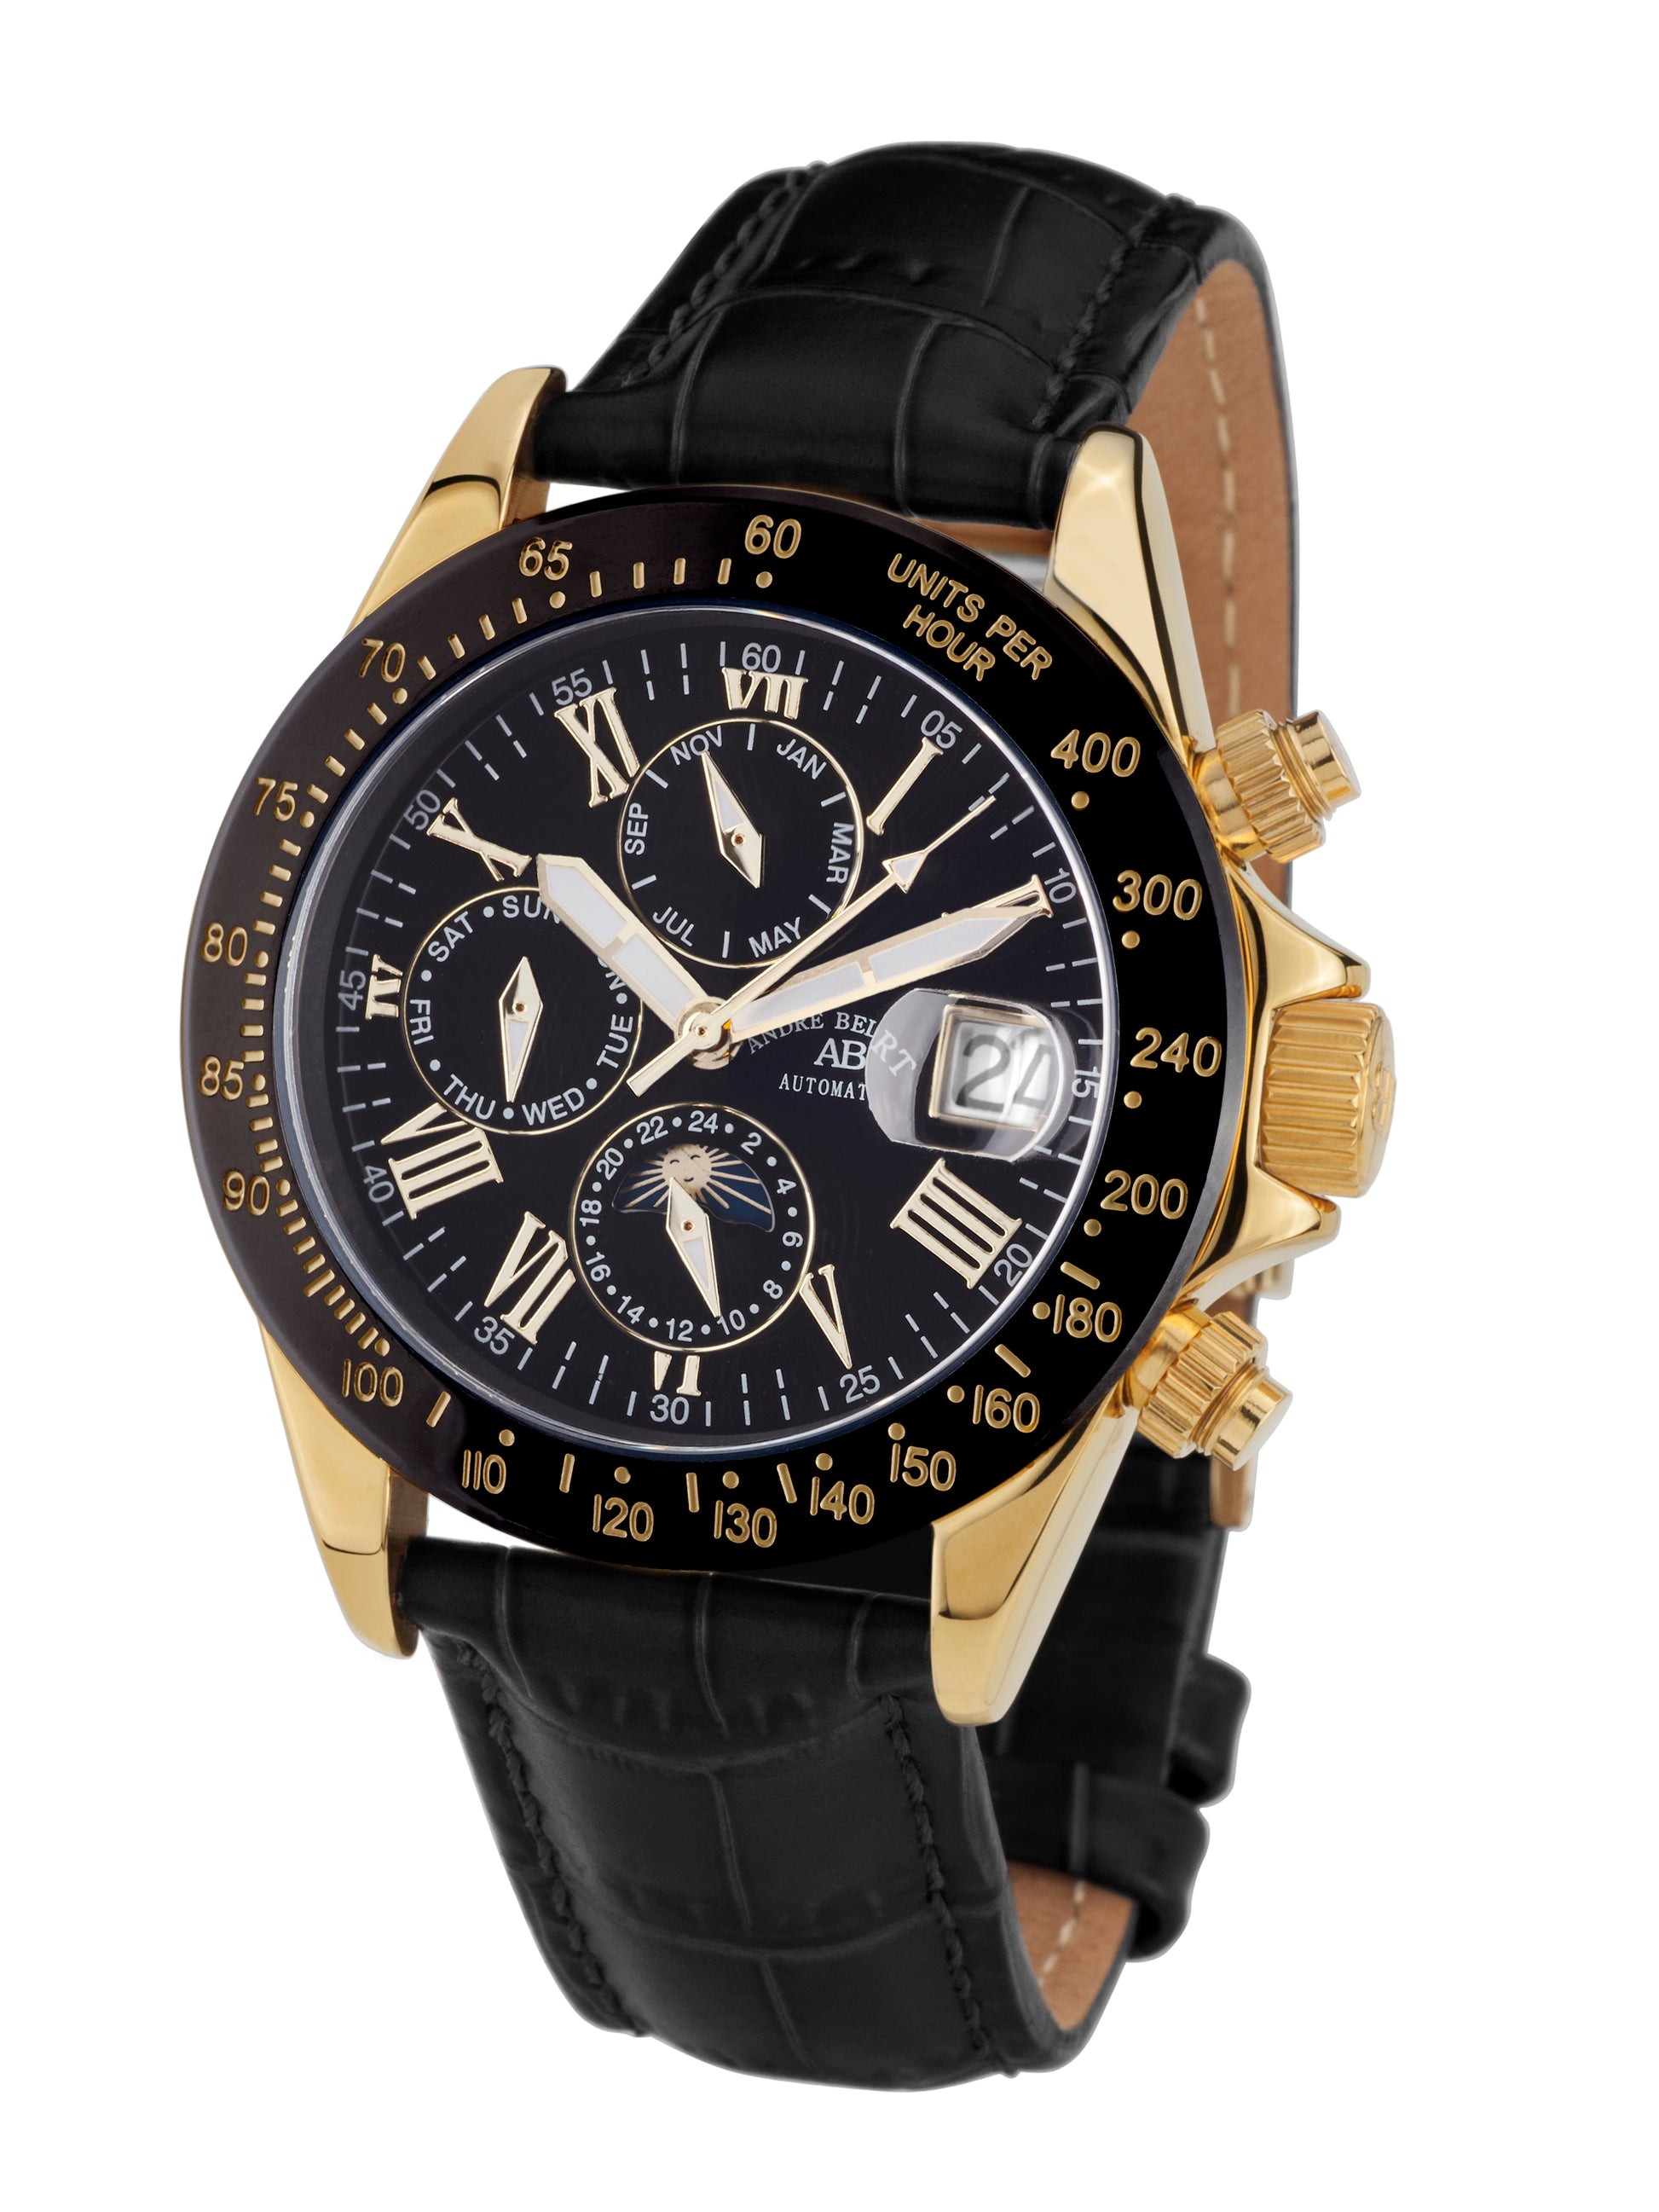 Automatic watches — Le Capitaine — André Belfort — gold onyx leather